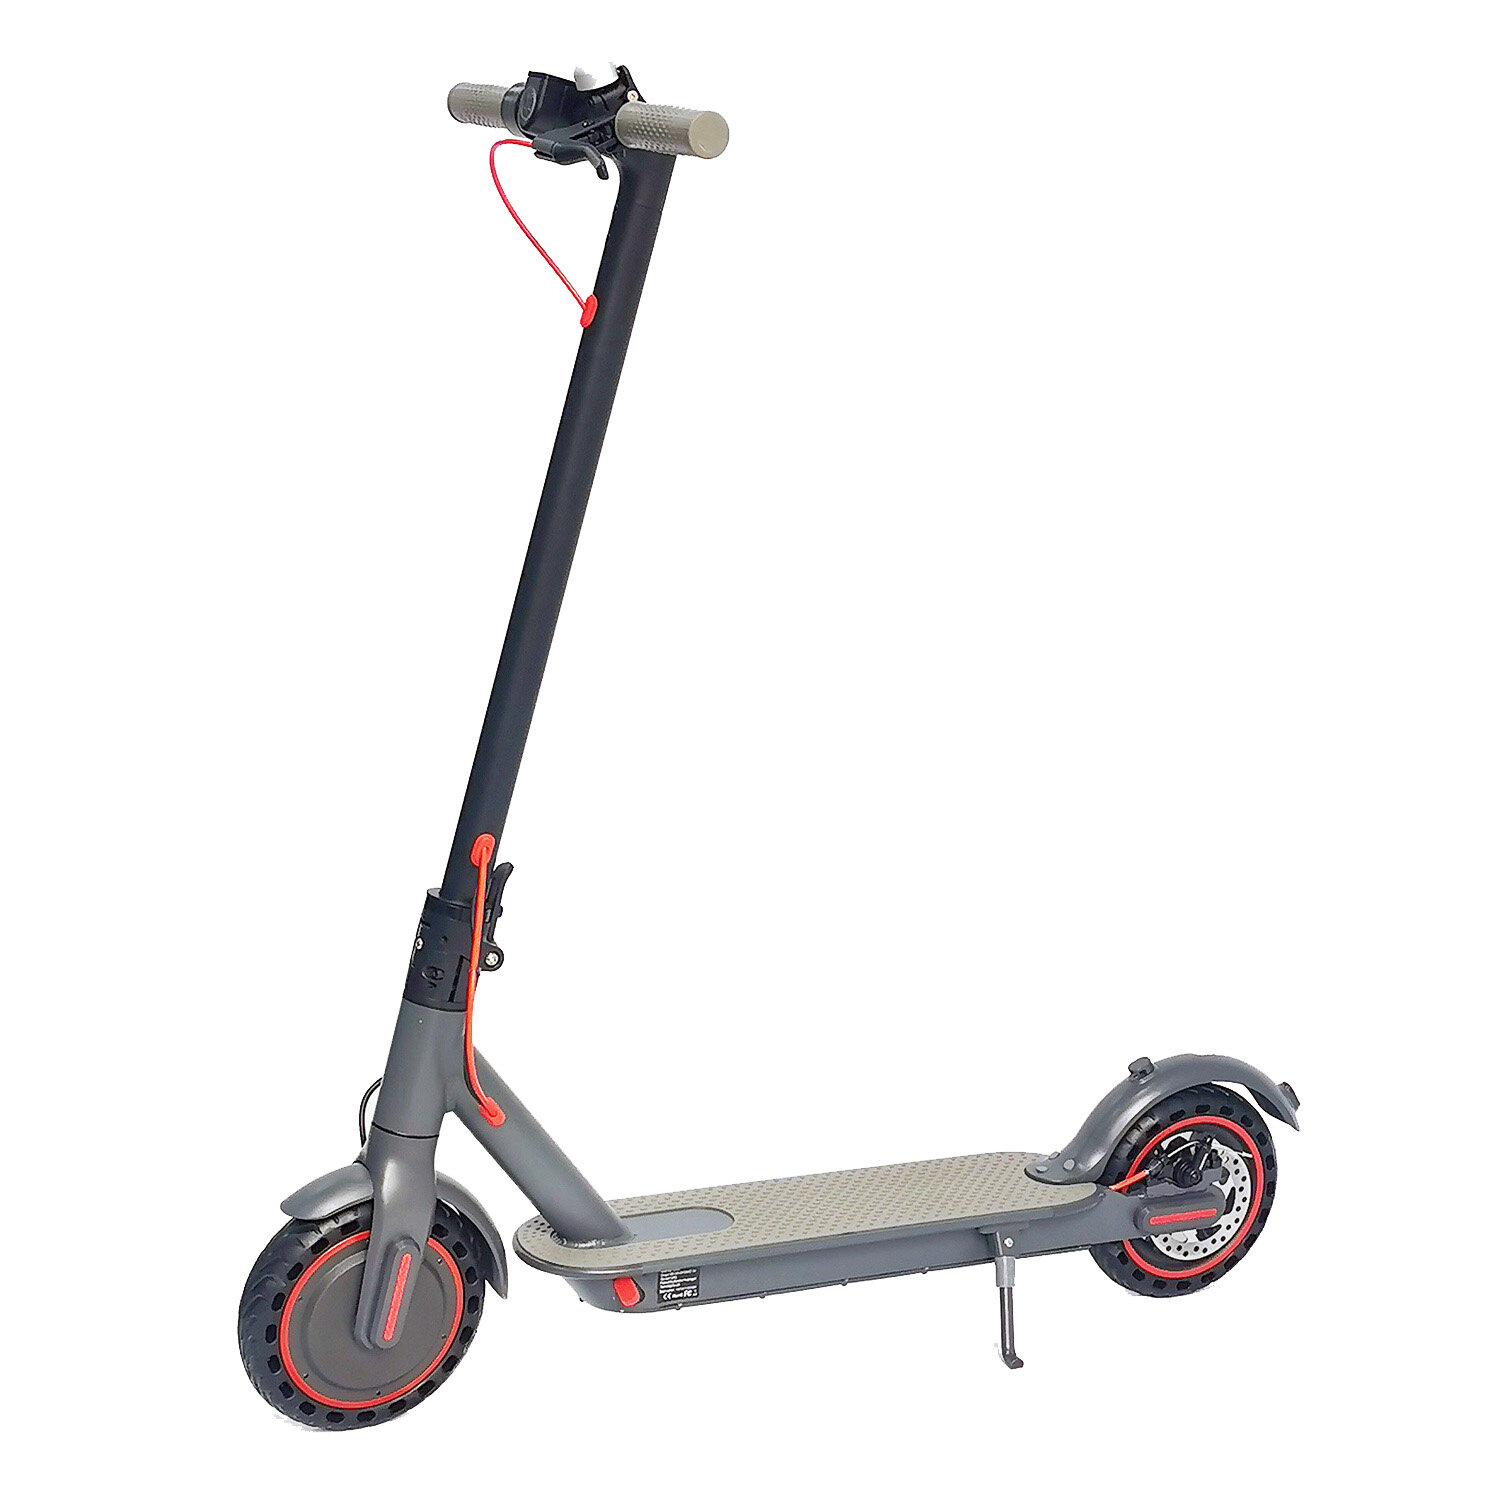 

[EU DIRECT] Emoko T4 PRO Electric Scooter 350W Motor 36V 10.4Ah Battery 8.5inch Tires 39KM Max Mileage 120KG Max Load Fo